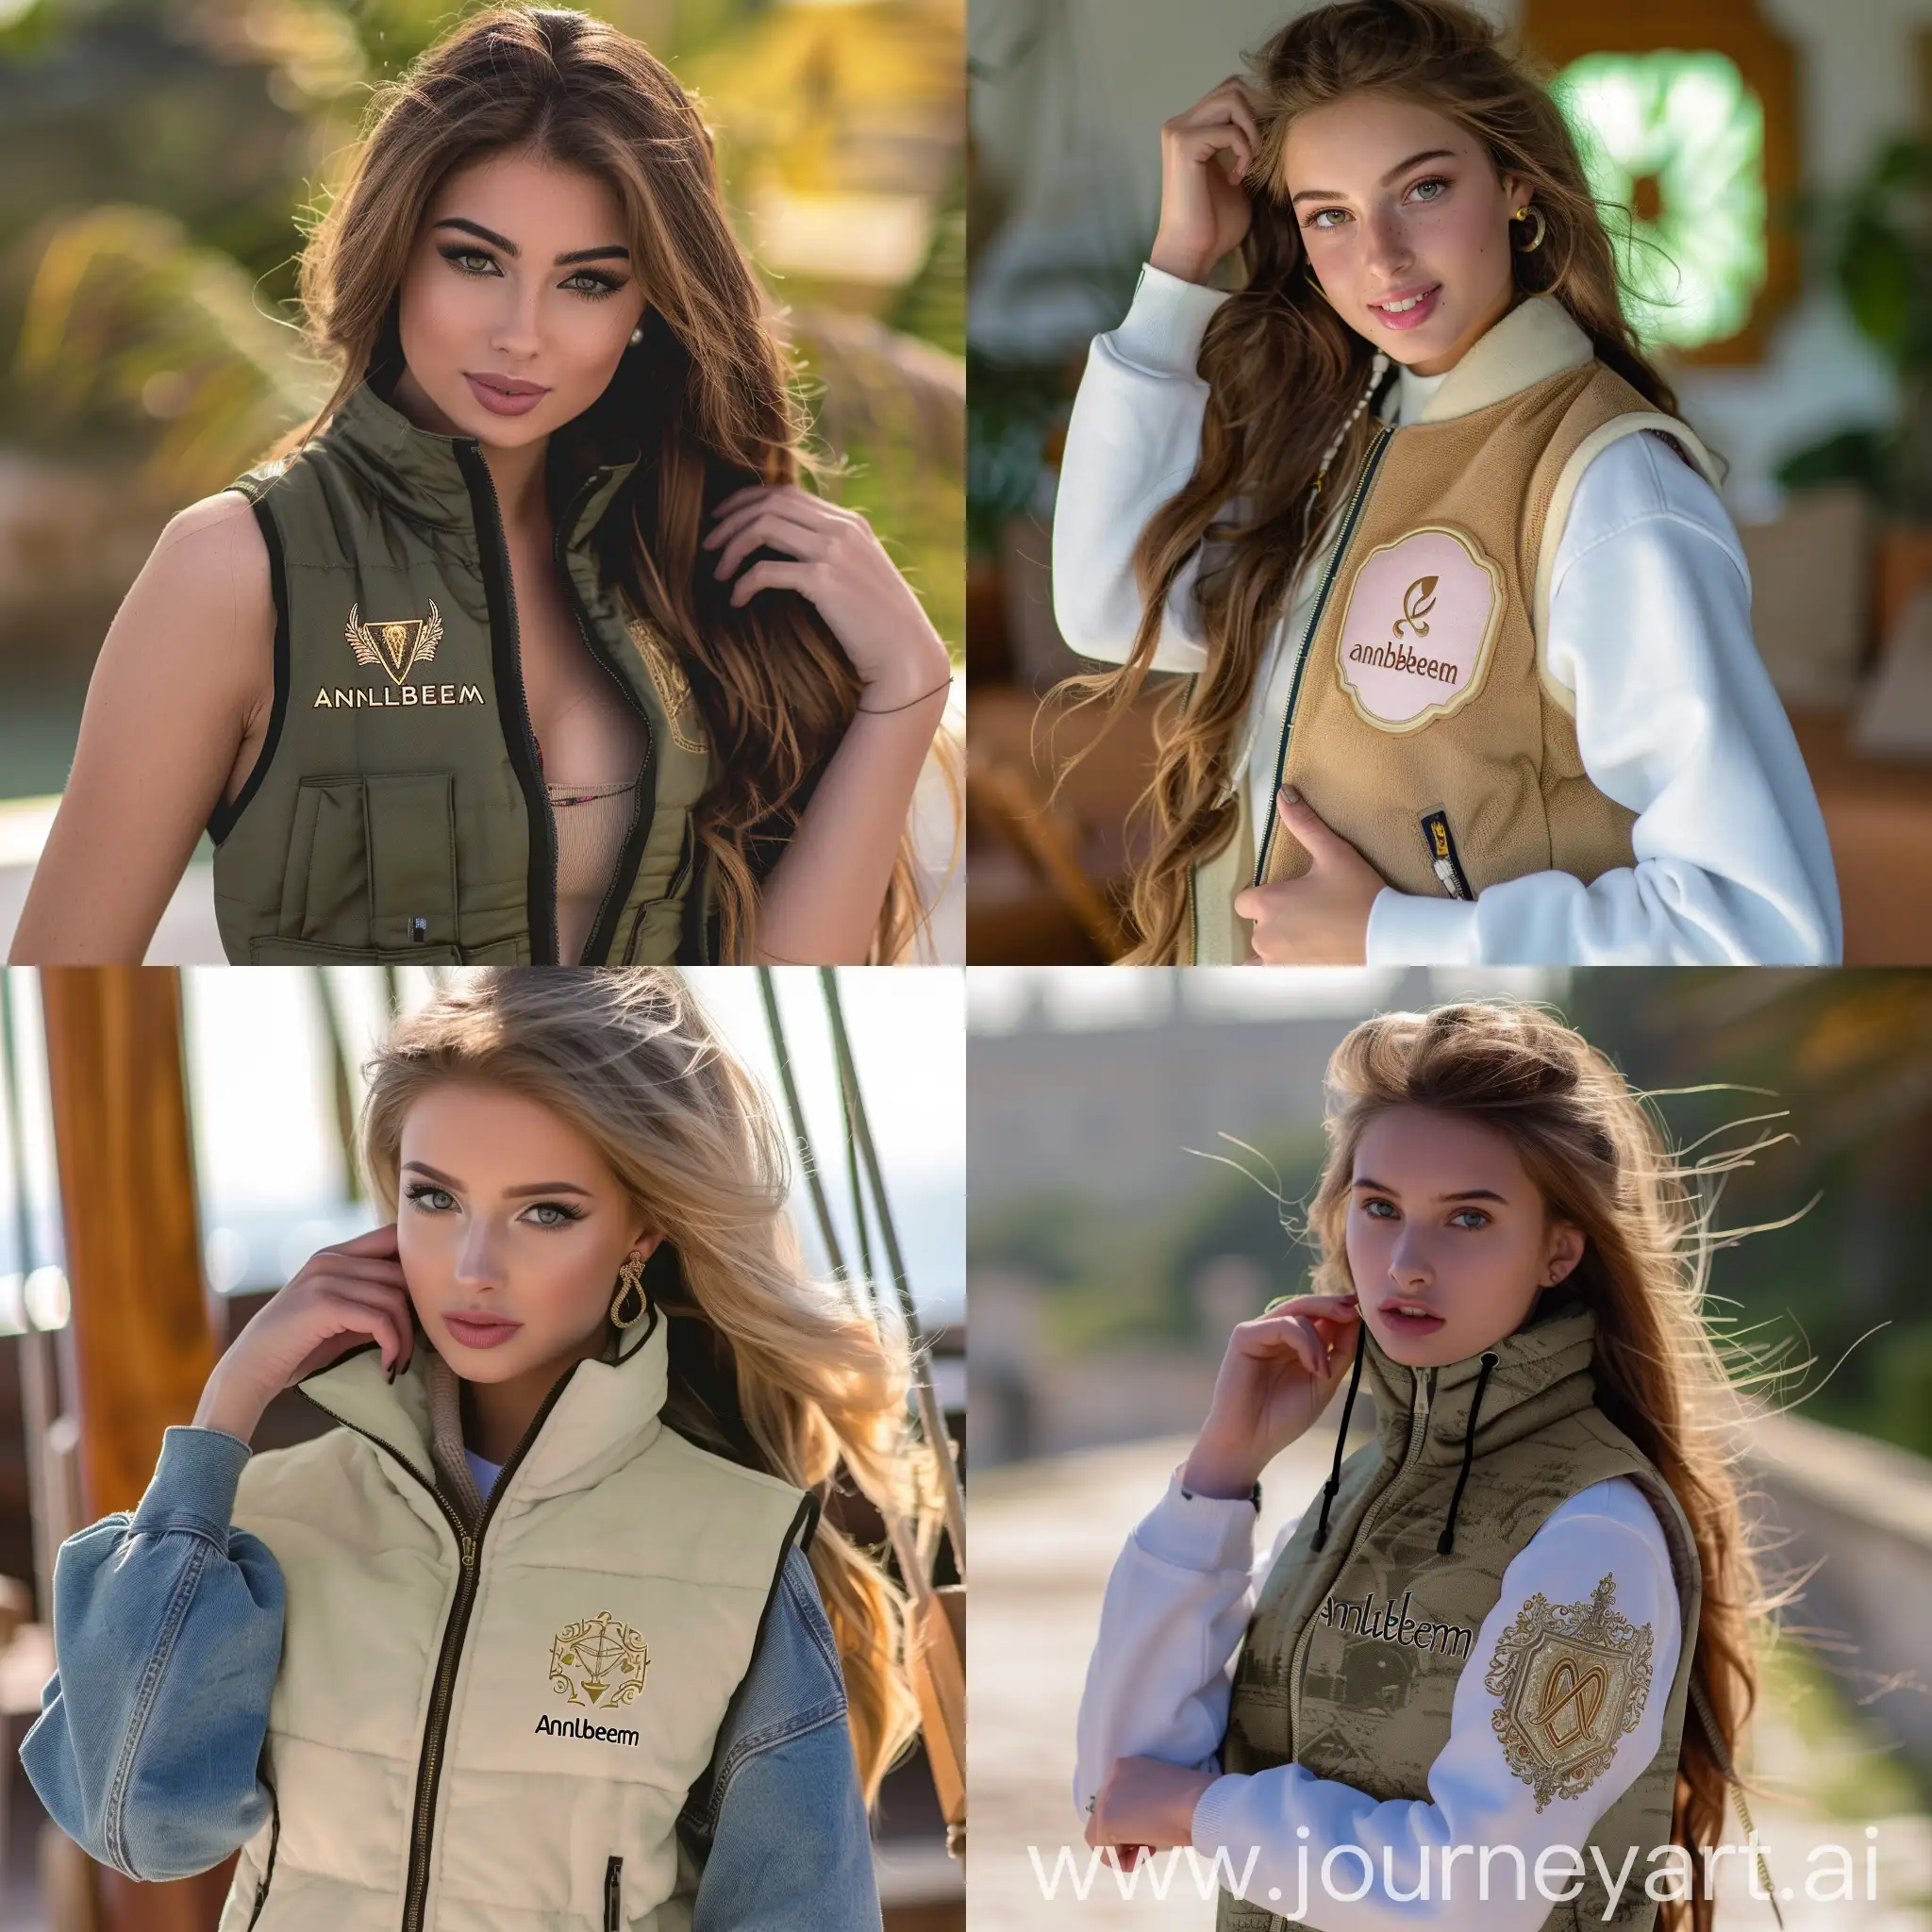 Stylish-Young-Woman-in-Anabelem-Logo-Vest